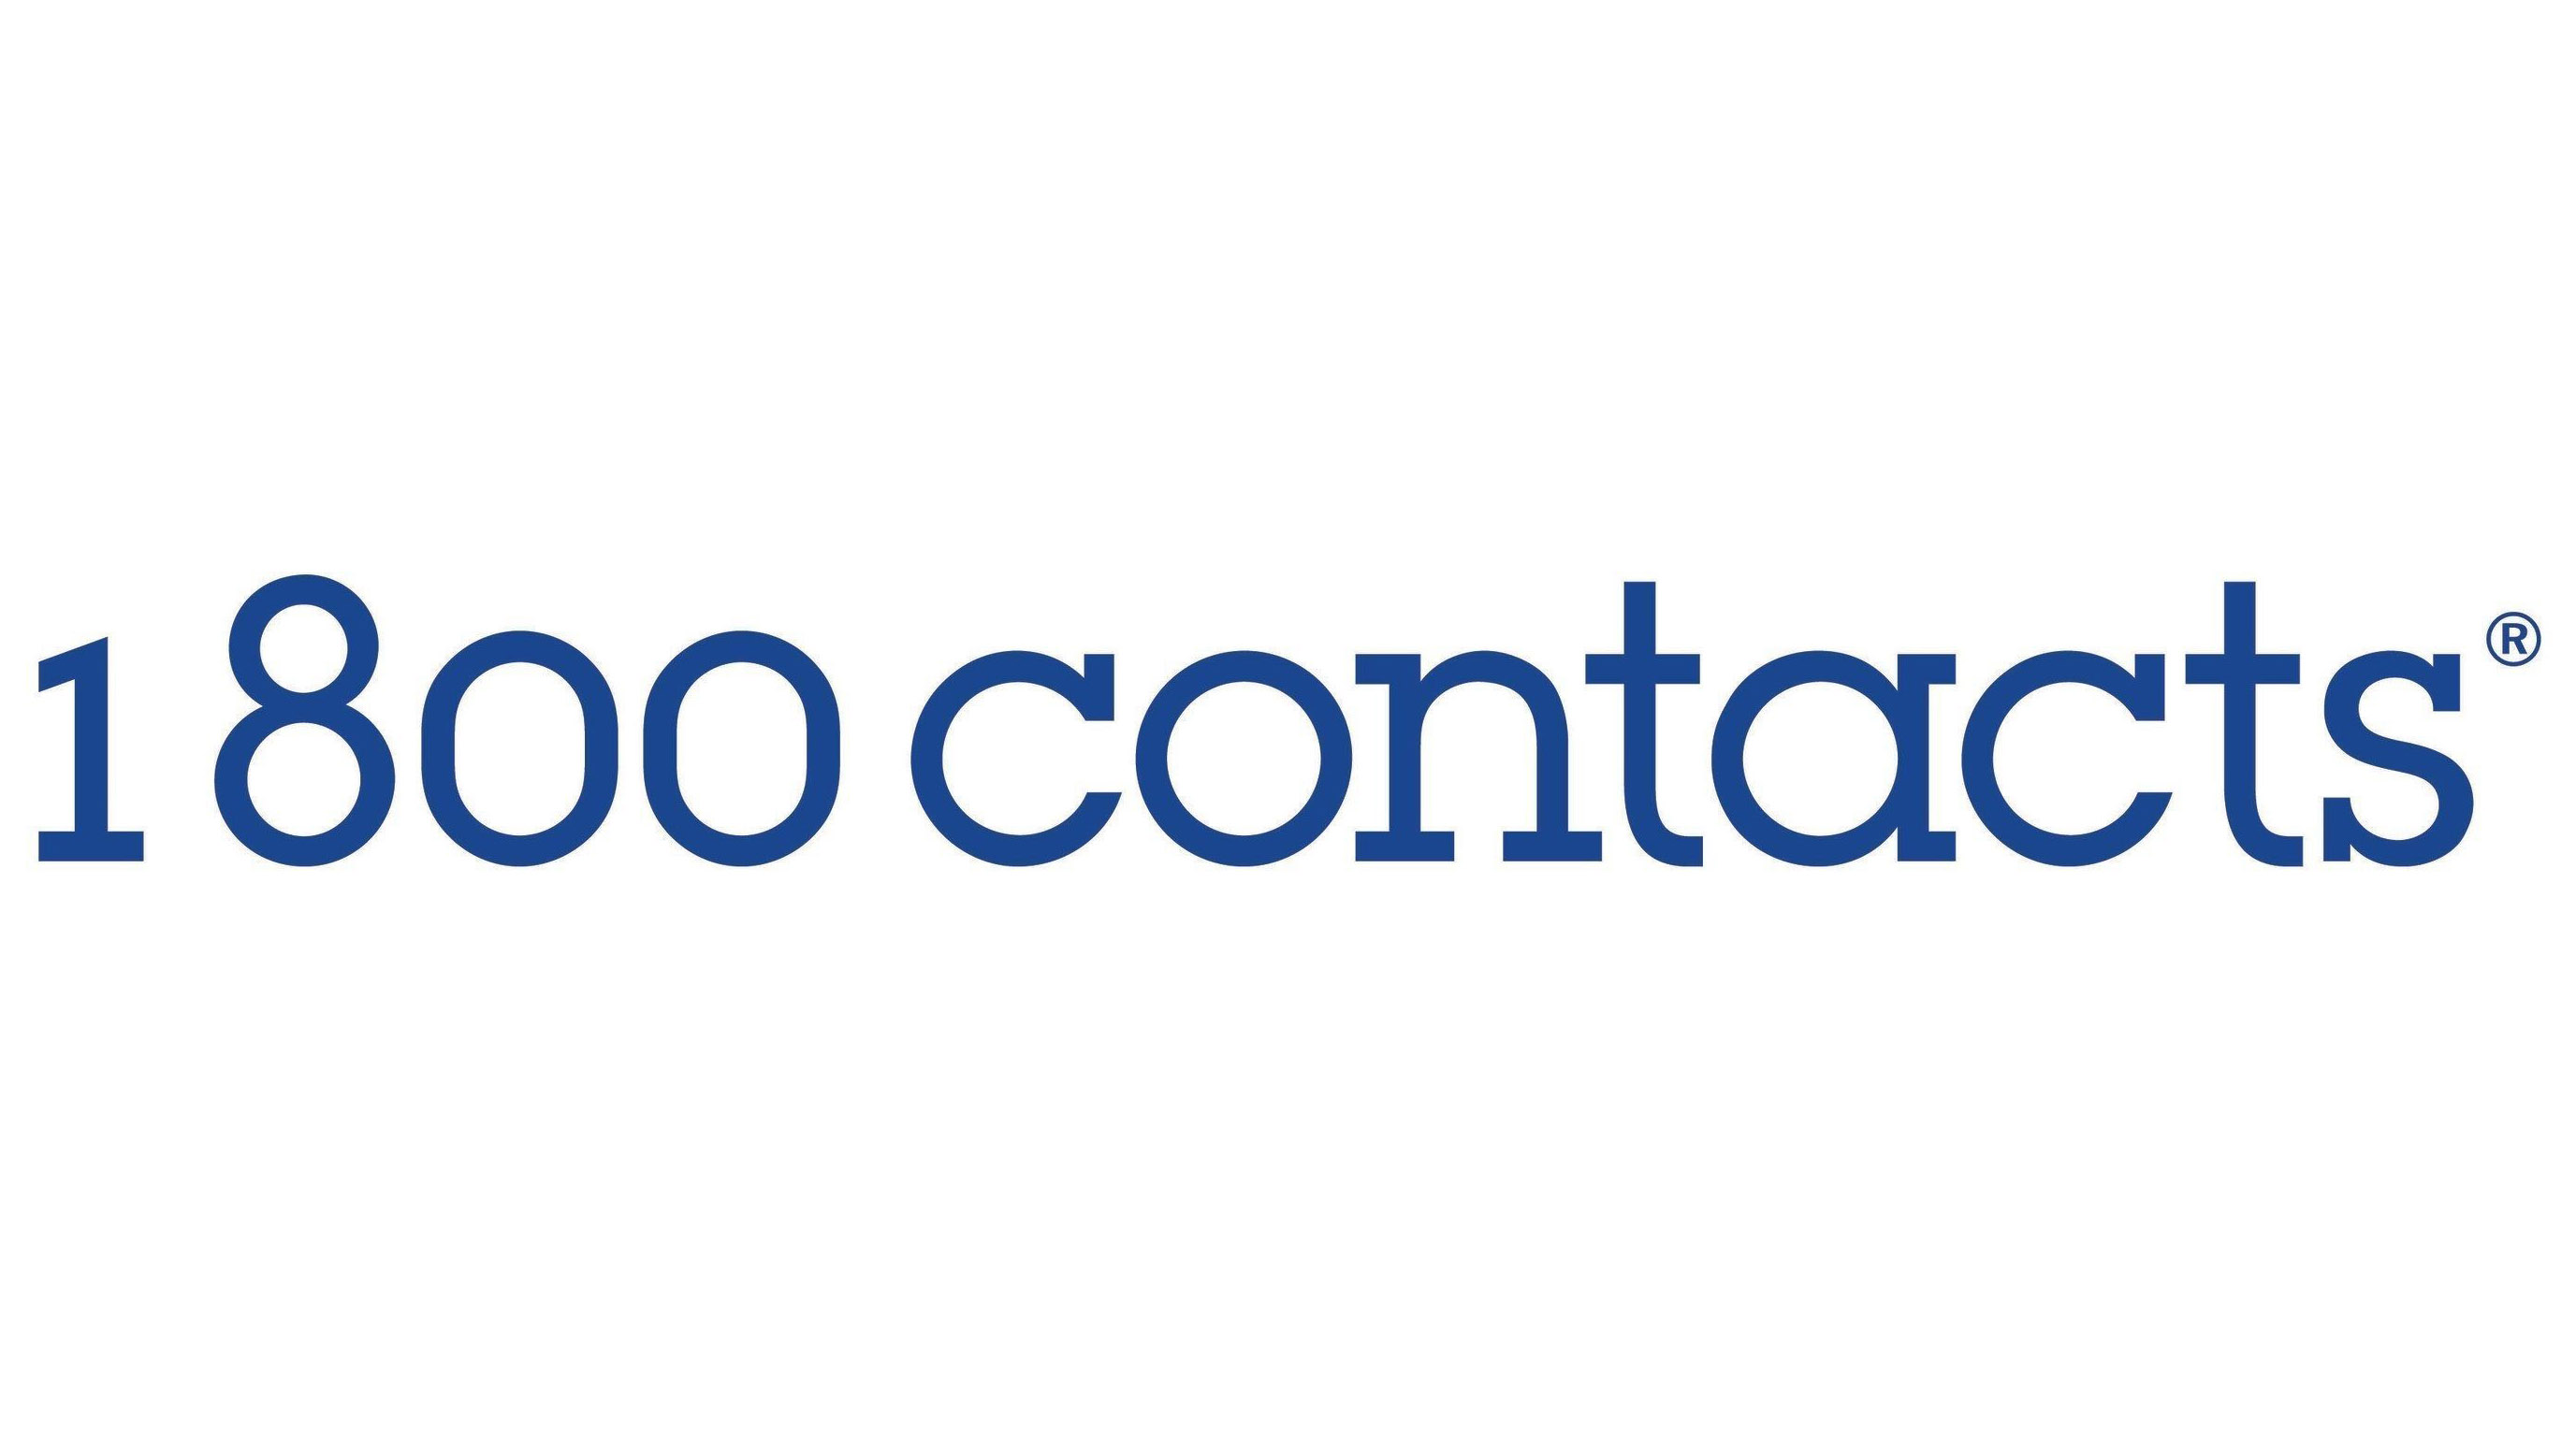 1800 Contacts review Top Ten Reviews